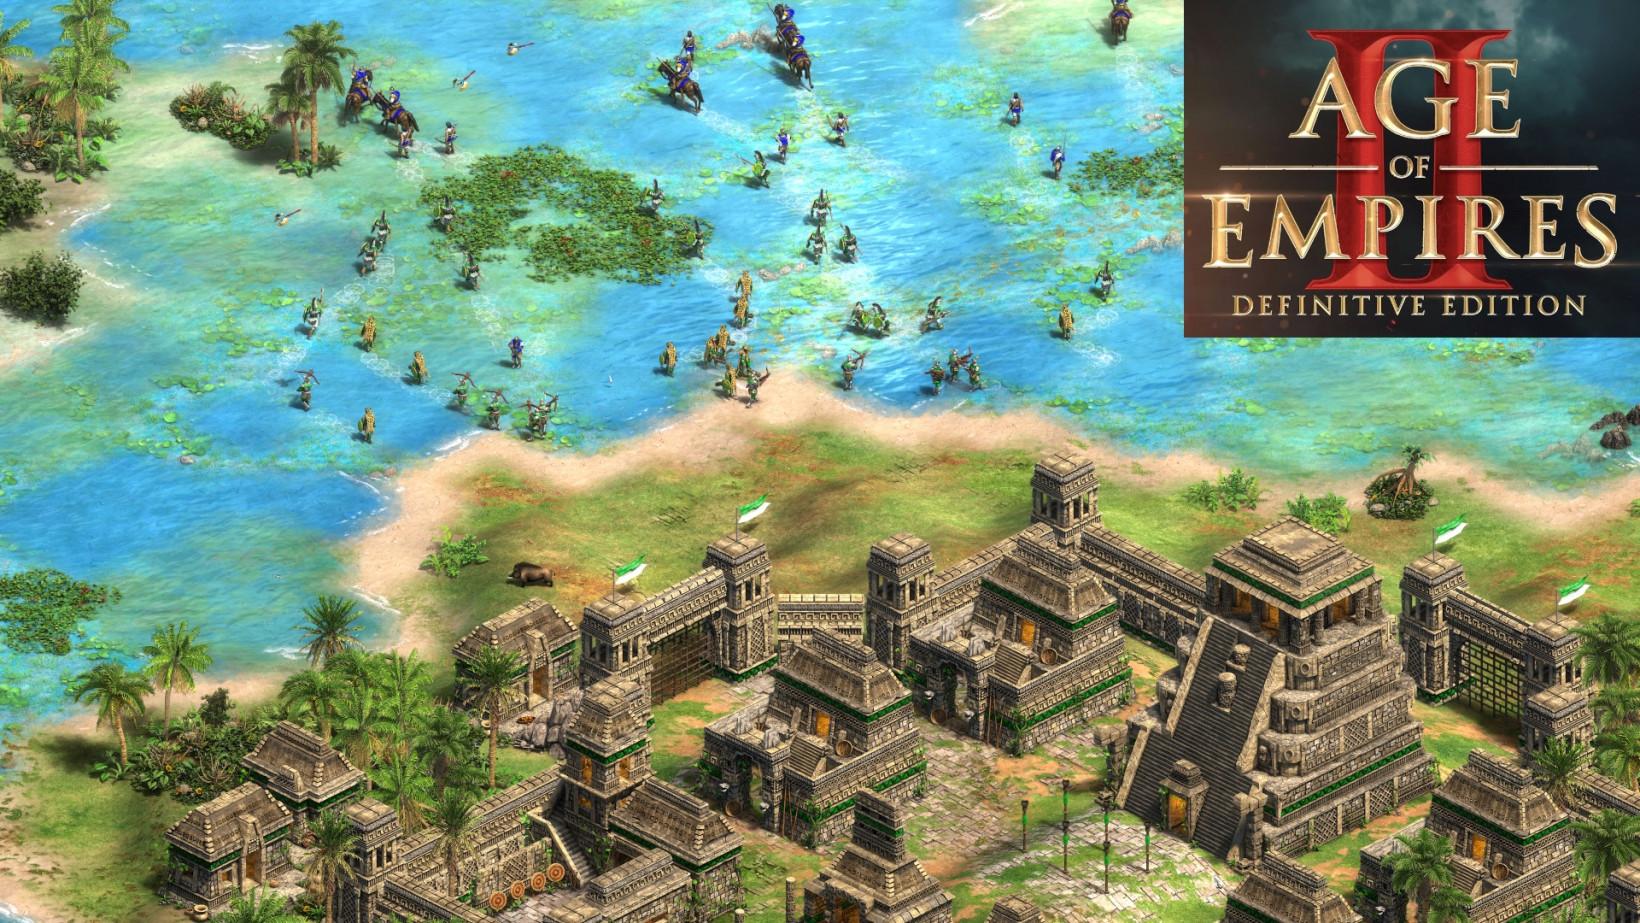 Age of Empires II: Definitive Edition is arriving